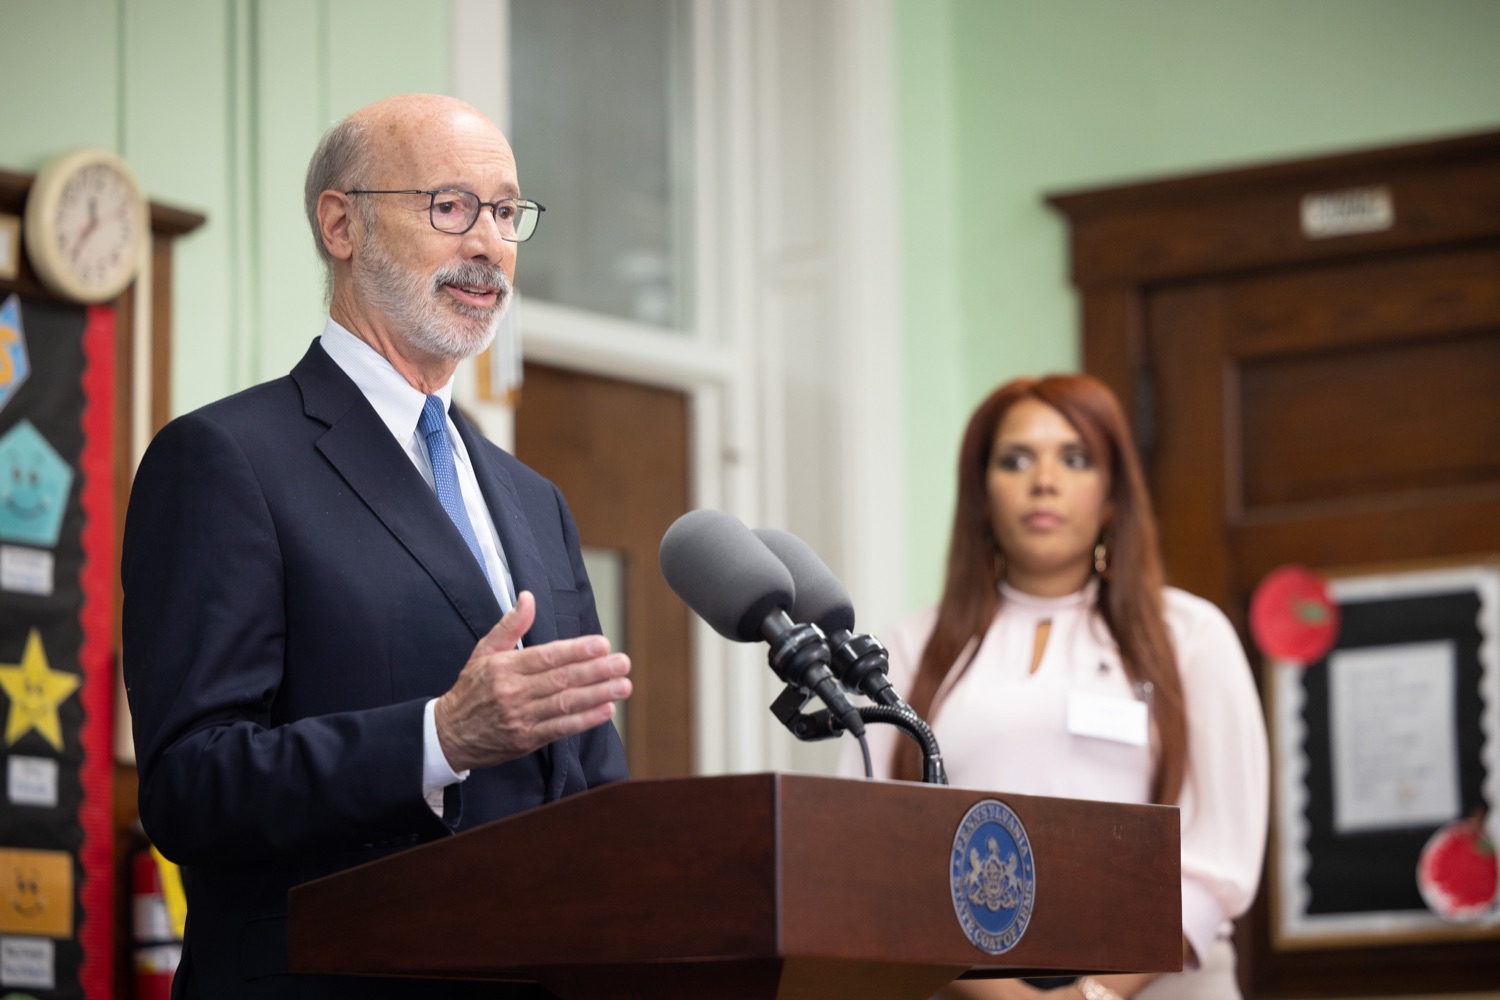 Pennsylvania Governor Tom Wolf speaks with the press.   Governor Tom Wolf joined childhood advocates and state lawmakers to highlight his accomplishments in increased funding for early childhood education during a visit to the Volunteers of America Children's Center in Allentown. In this year's budget alone, the Wolf Administration has secured a $79 million increase in early childhood education, providing more children and families in Pennsylvania with access to high-quality early learning programs through Pennsylvania Pre-K Counts and the Head Start Supplemental Assistance Program (HSSAP).  SEPTEMBER 09, 2022 - ALLENTOWN, PA<br><a href="https://filesource.amperwave.net/commonwealthofpa/photo/22174_gov_preKfunding_dz_004.JPG" target="_blank">⇣ Download Photo</a>